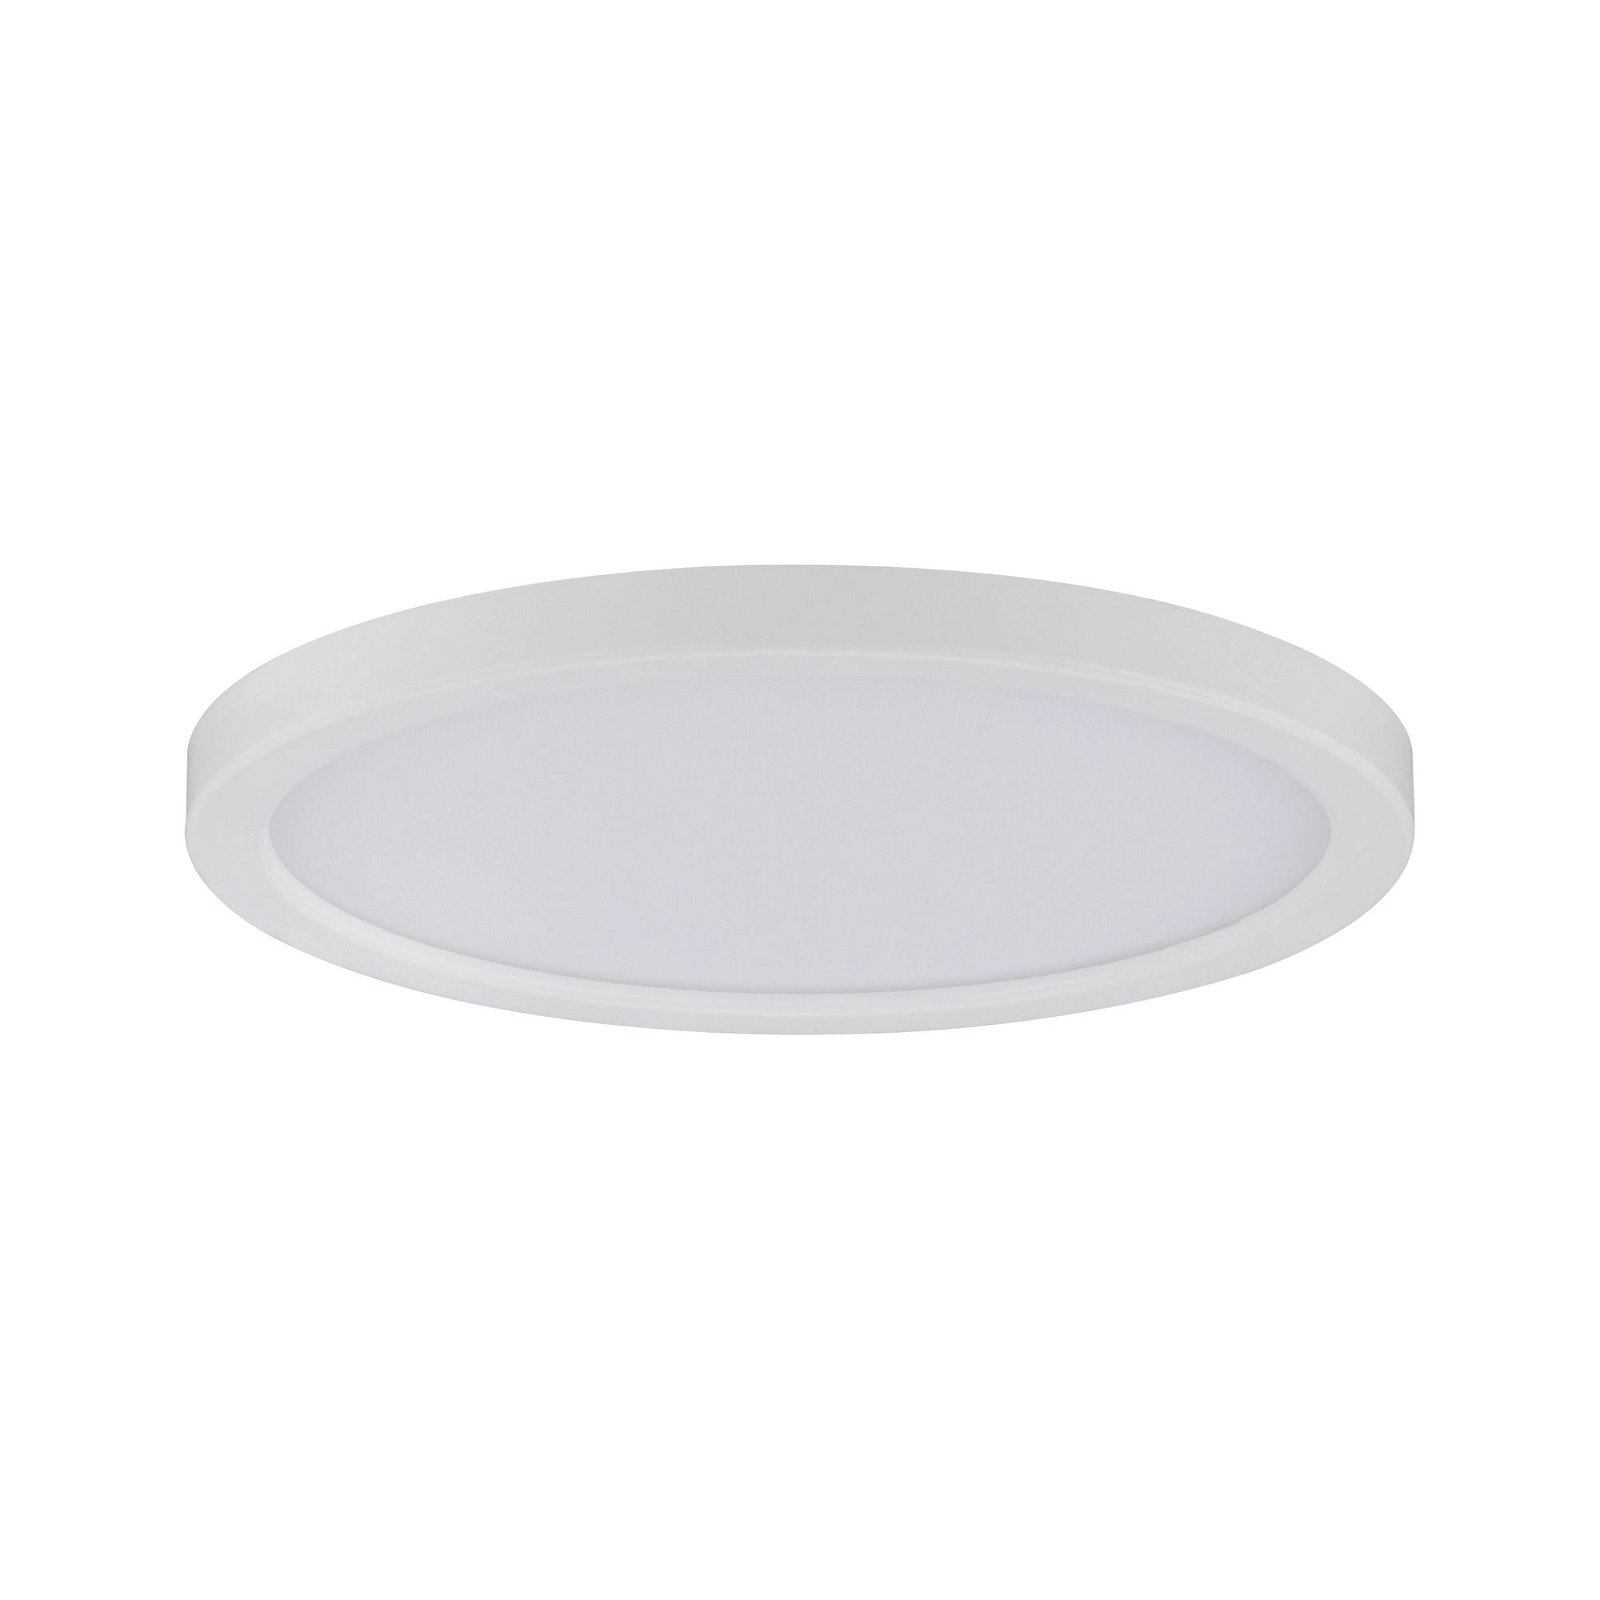 LED-inbouwpaneel Areo rond 120mm 3000K Wit mat